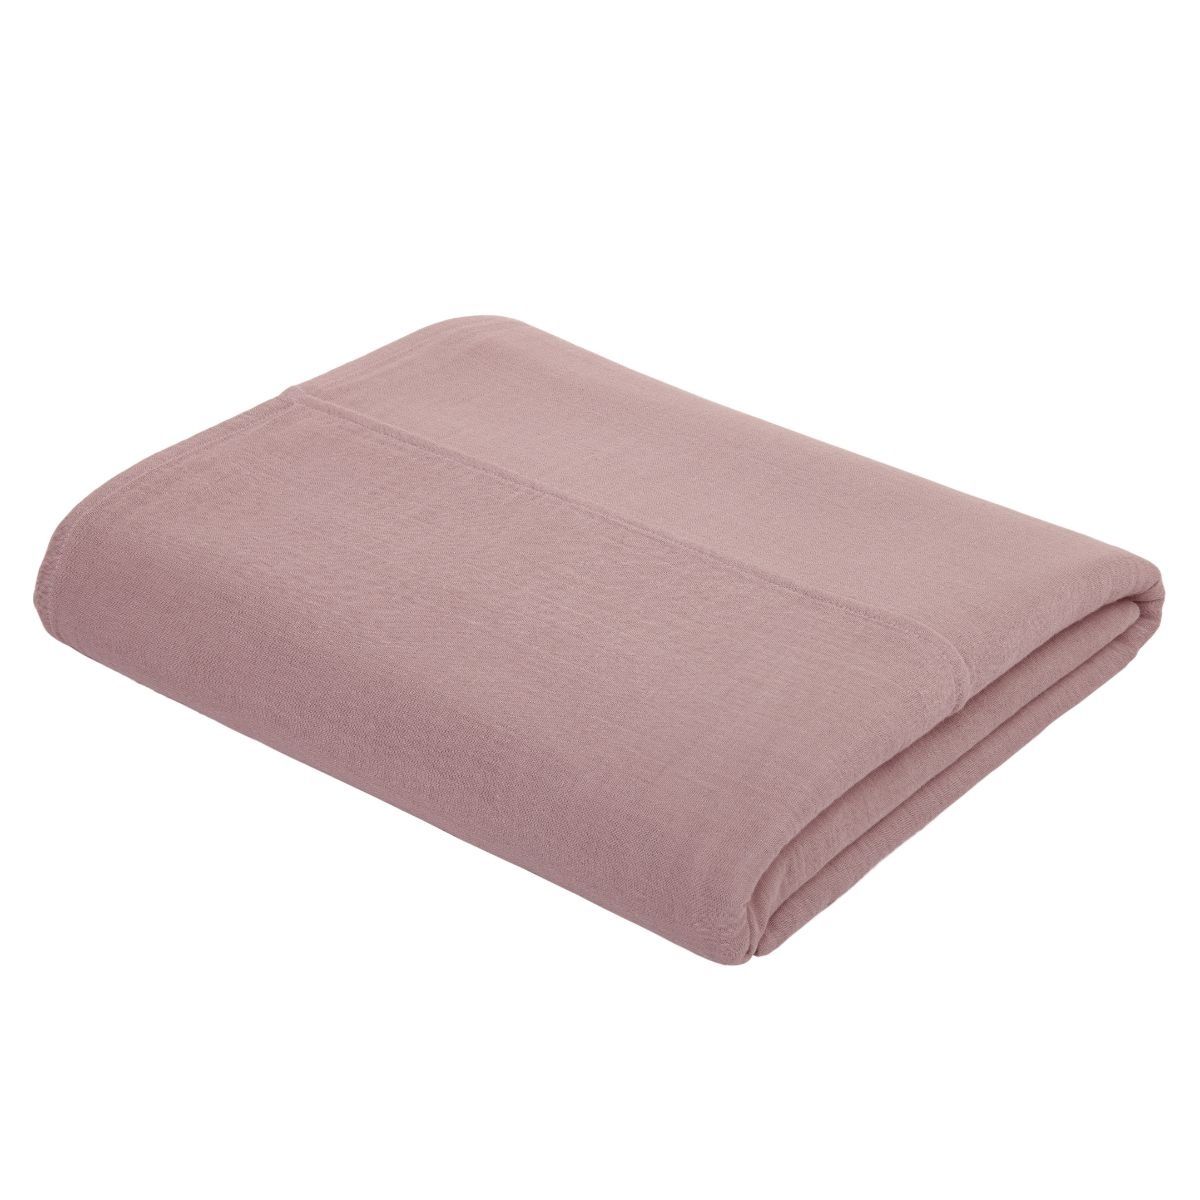 Numero 74 Top Flat Bed Sheet dusty pink 리넨 